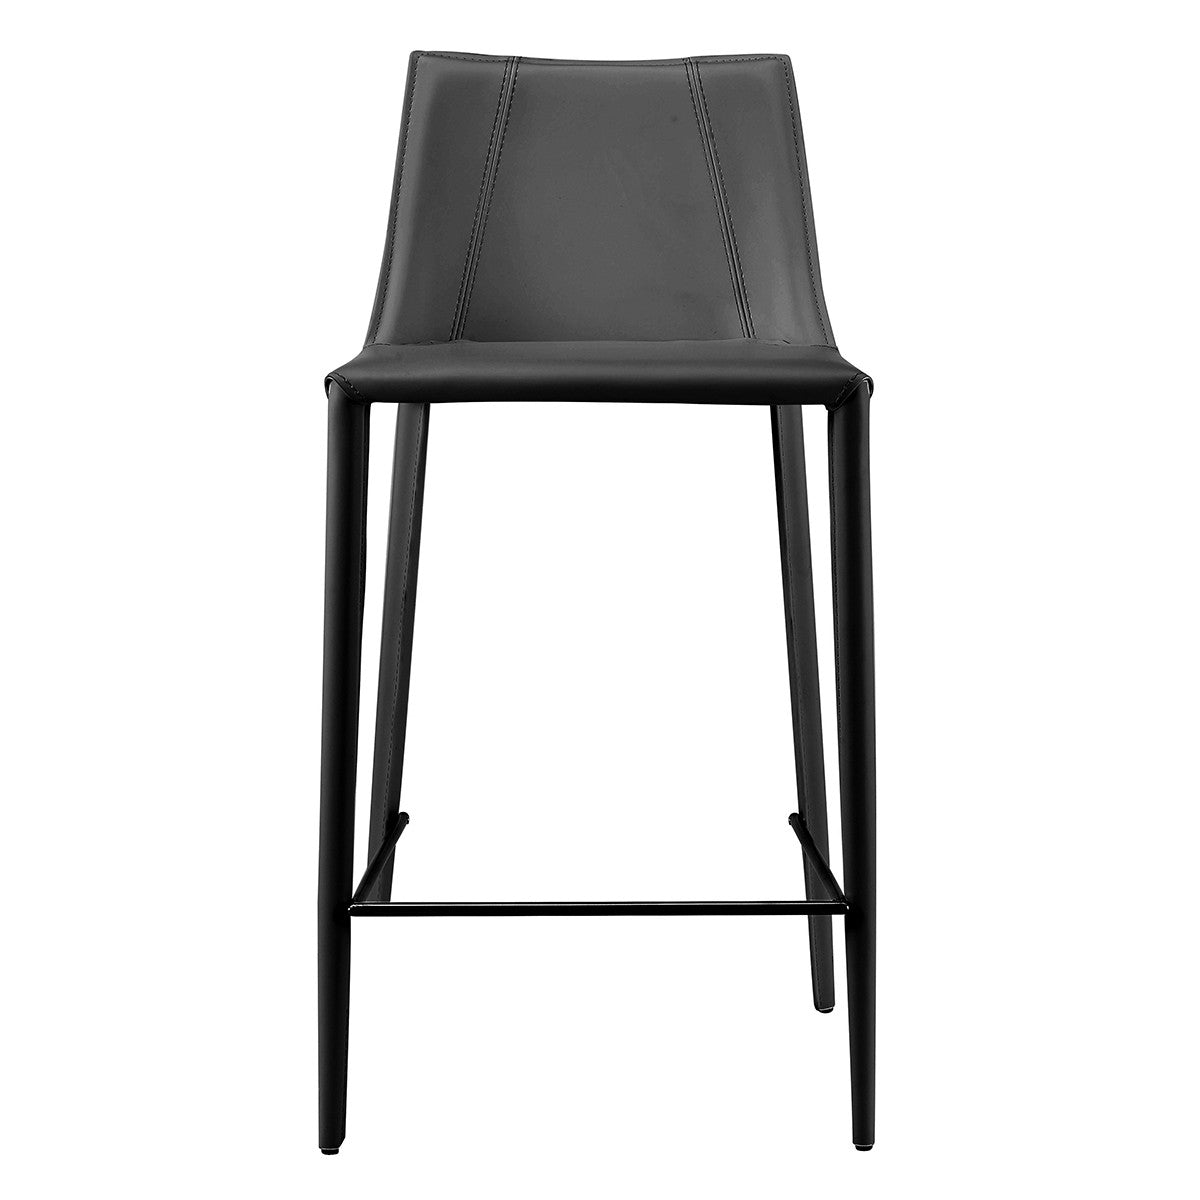 26" Black Steel Low Back Counter Height Bar Chair